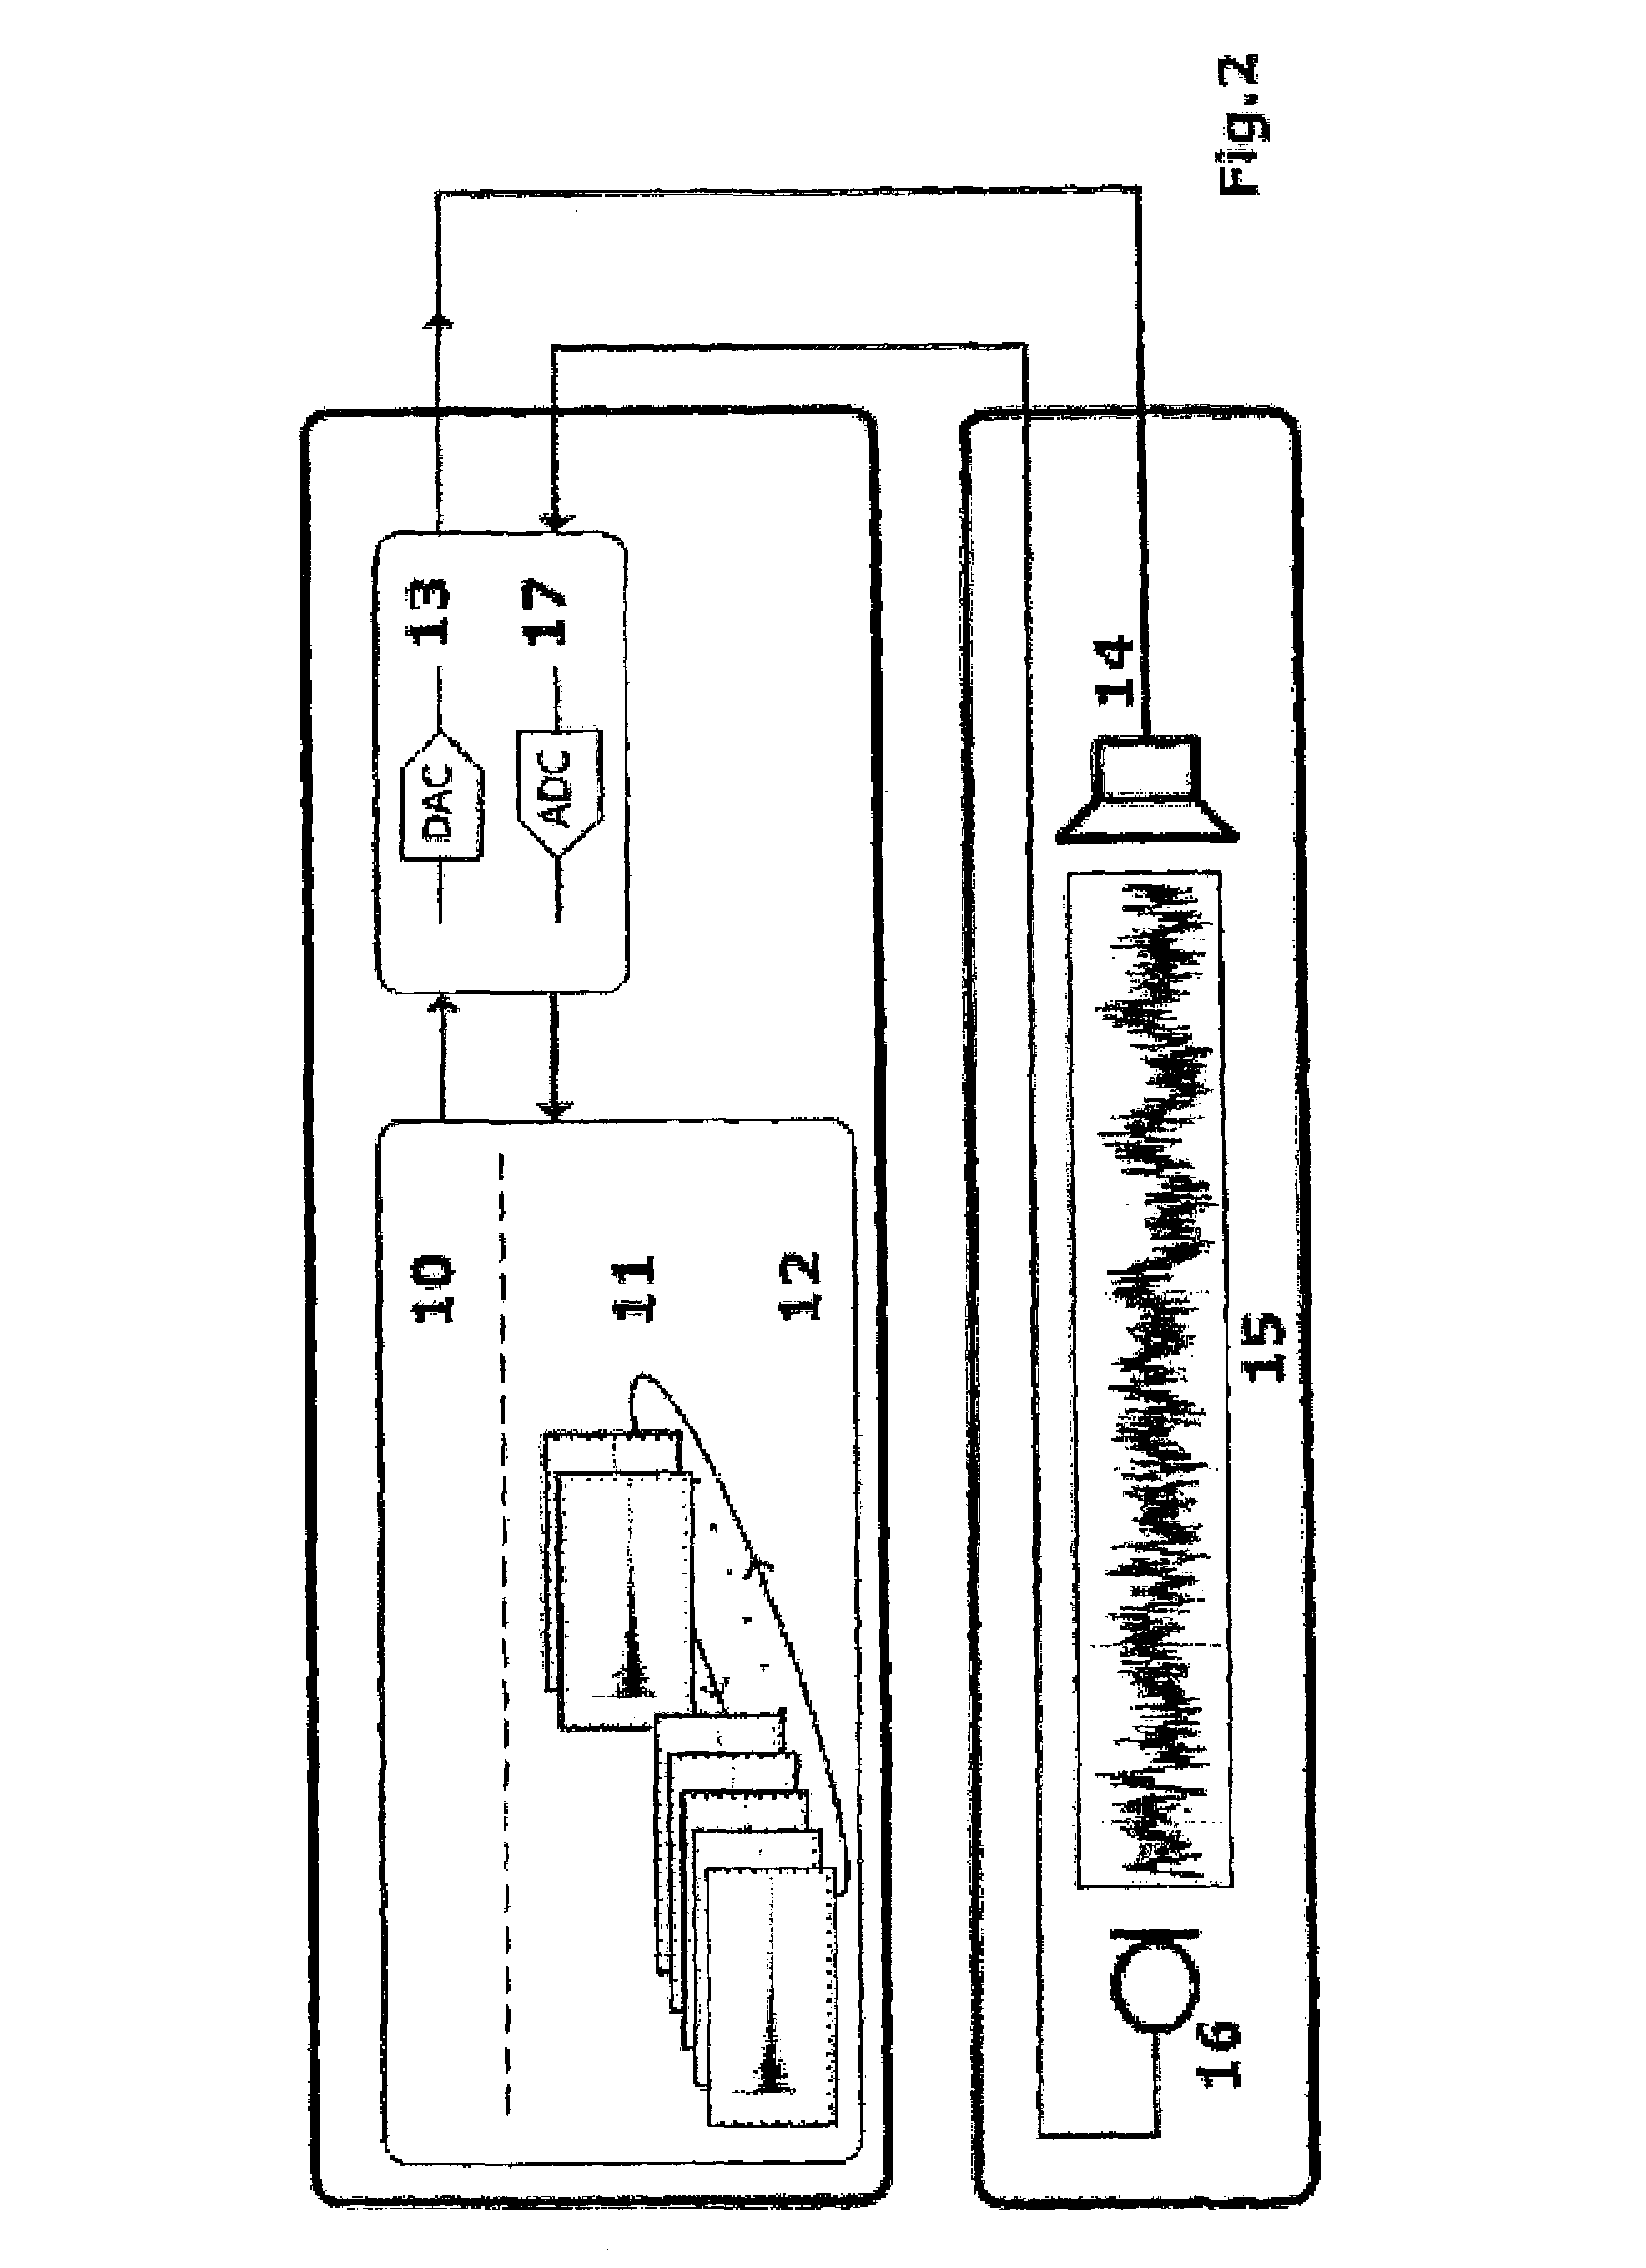 Method and device for determining a room acoustic impulse response in the time domain